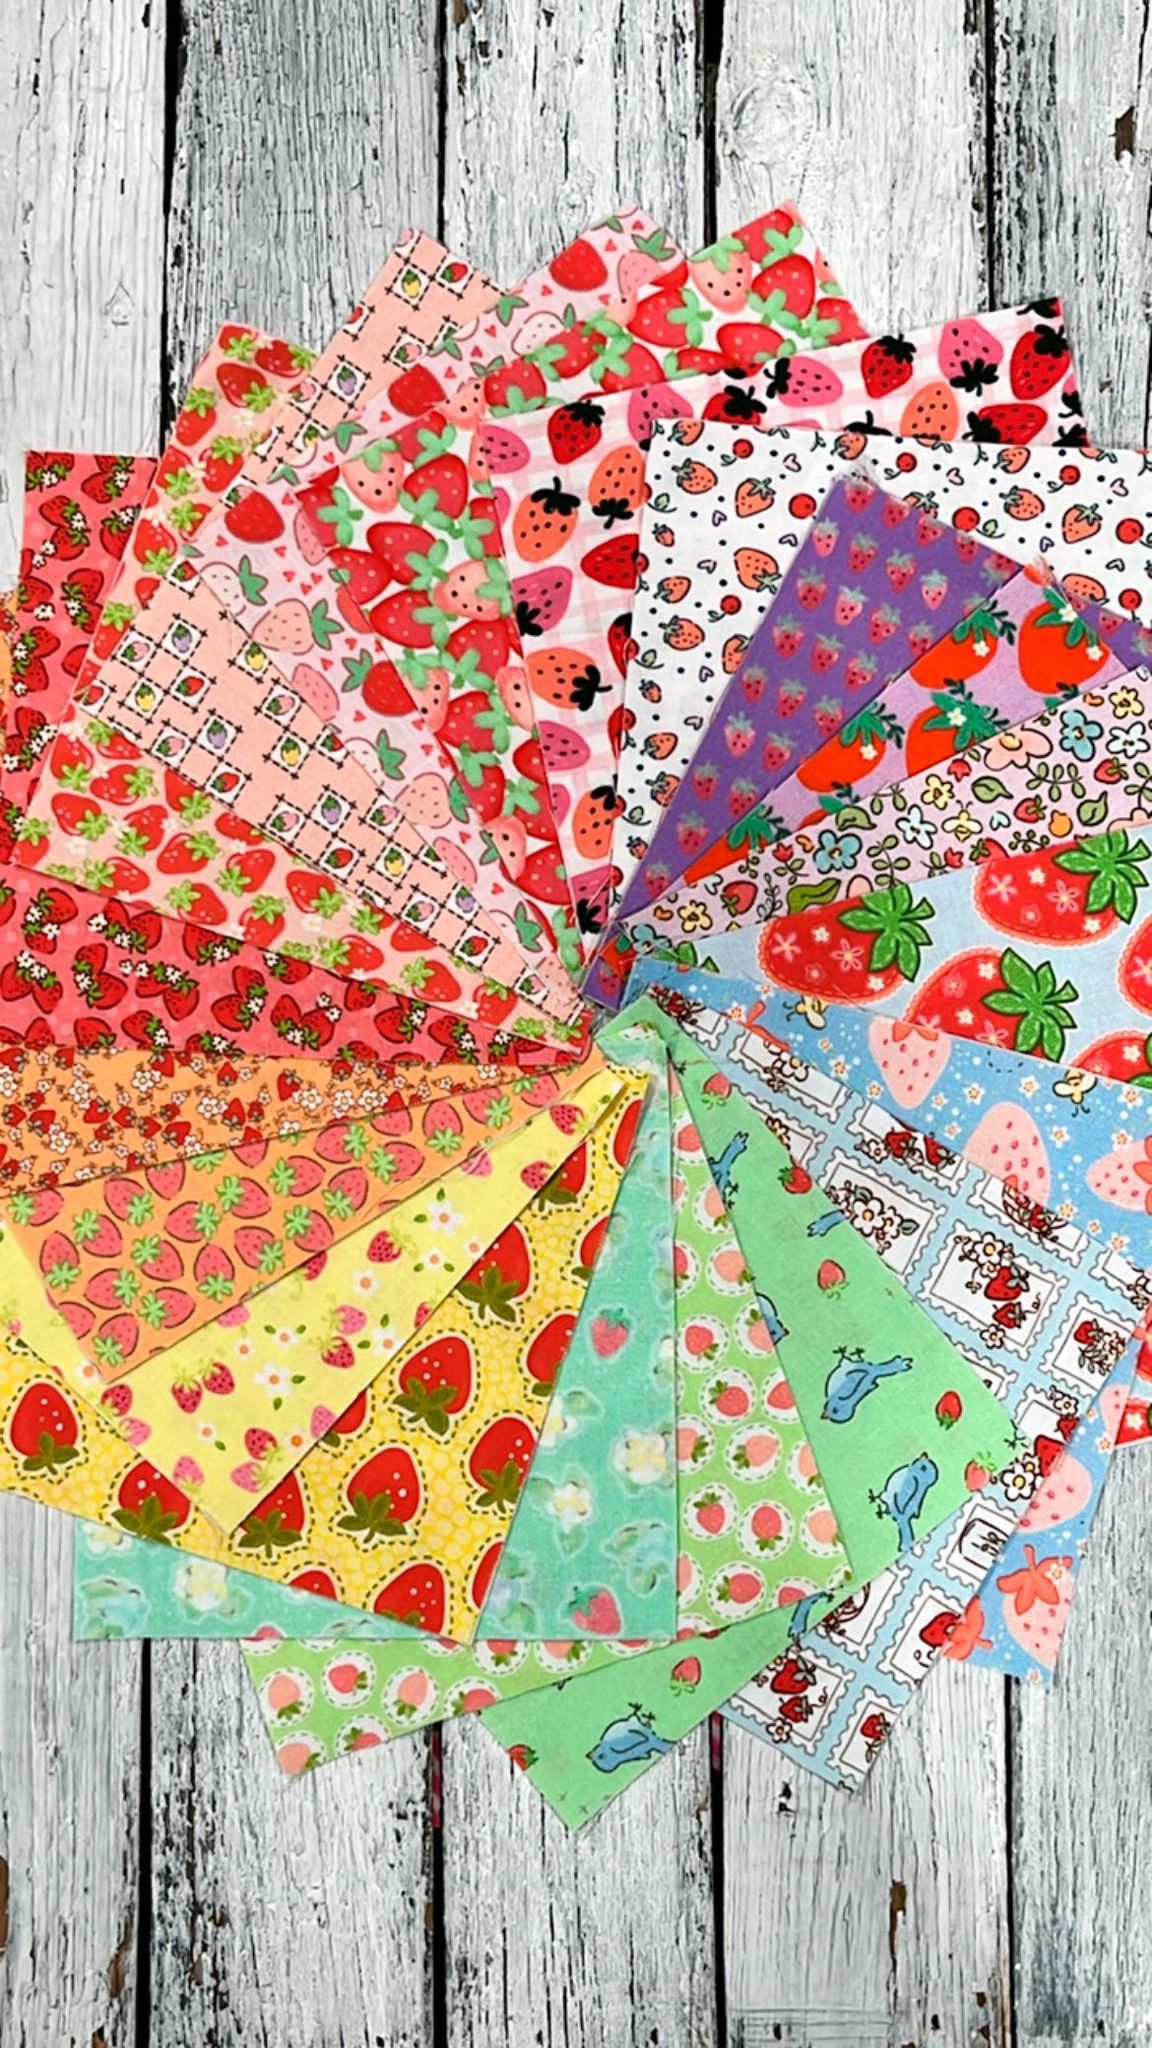 #strawberrydreams Fabric Packs